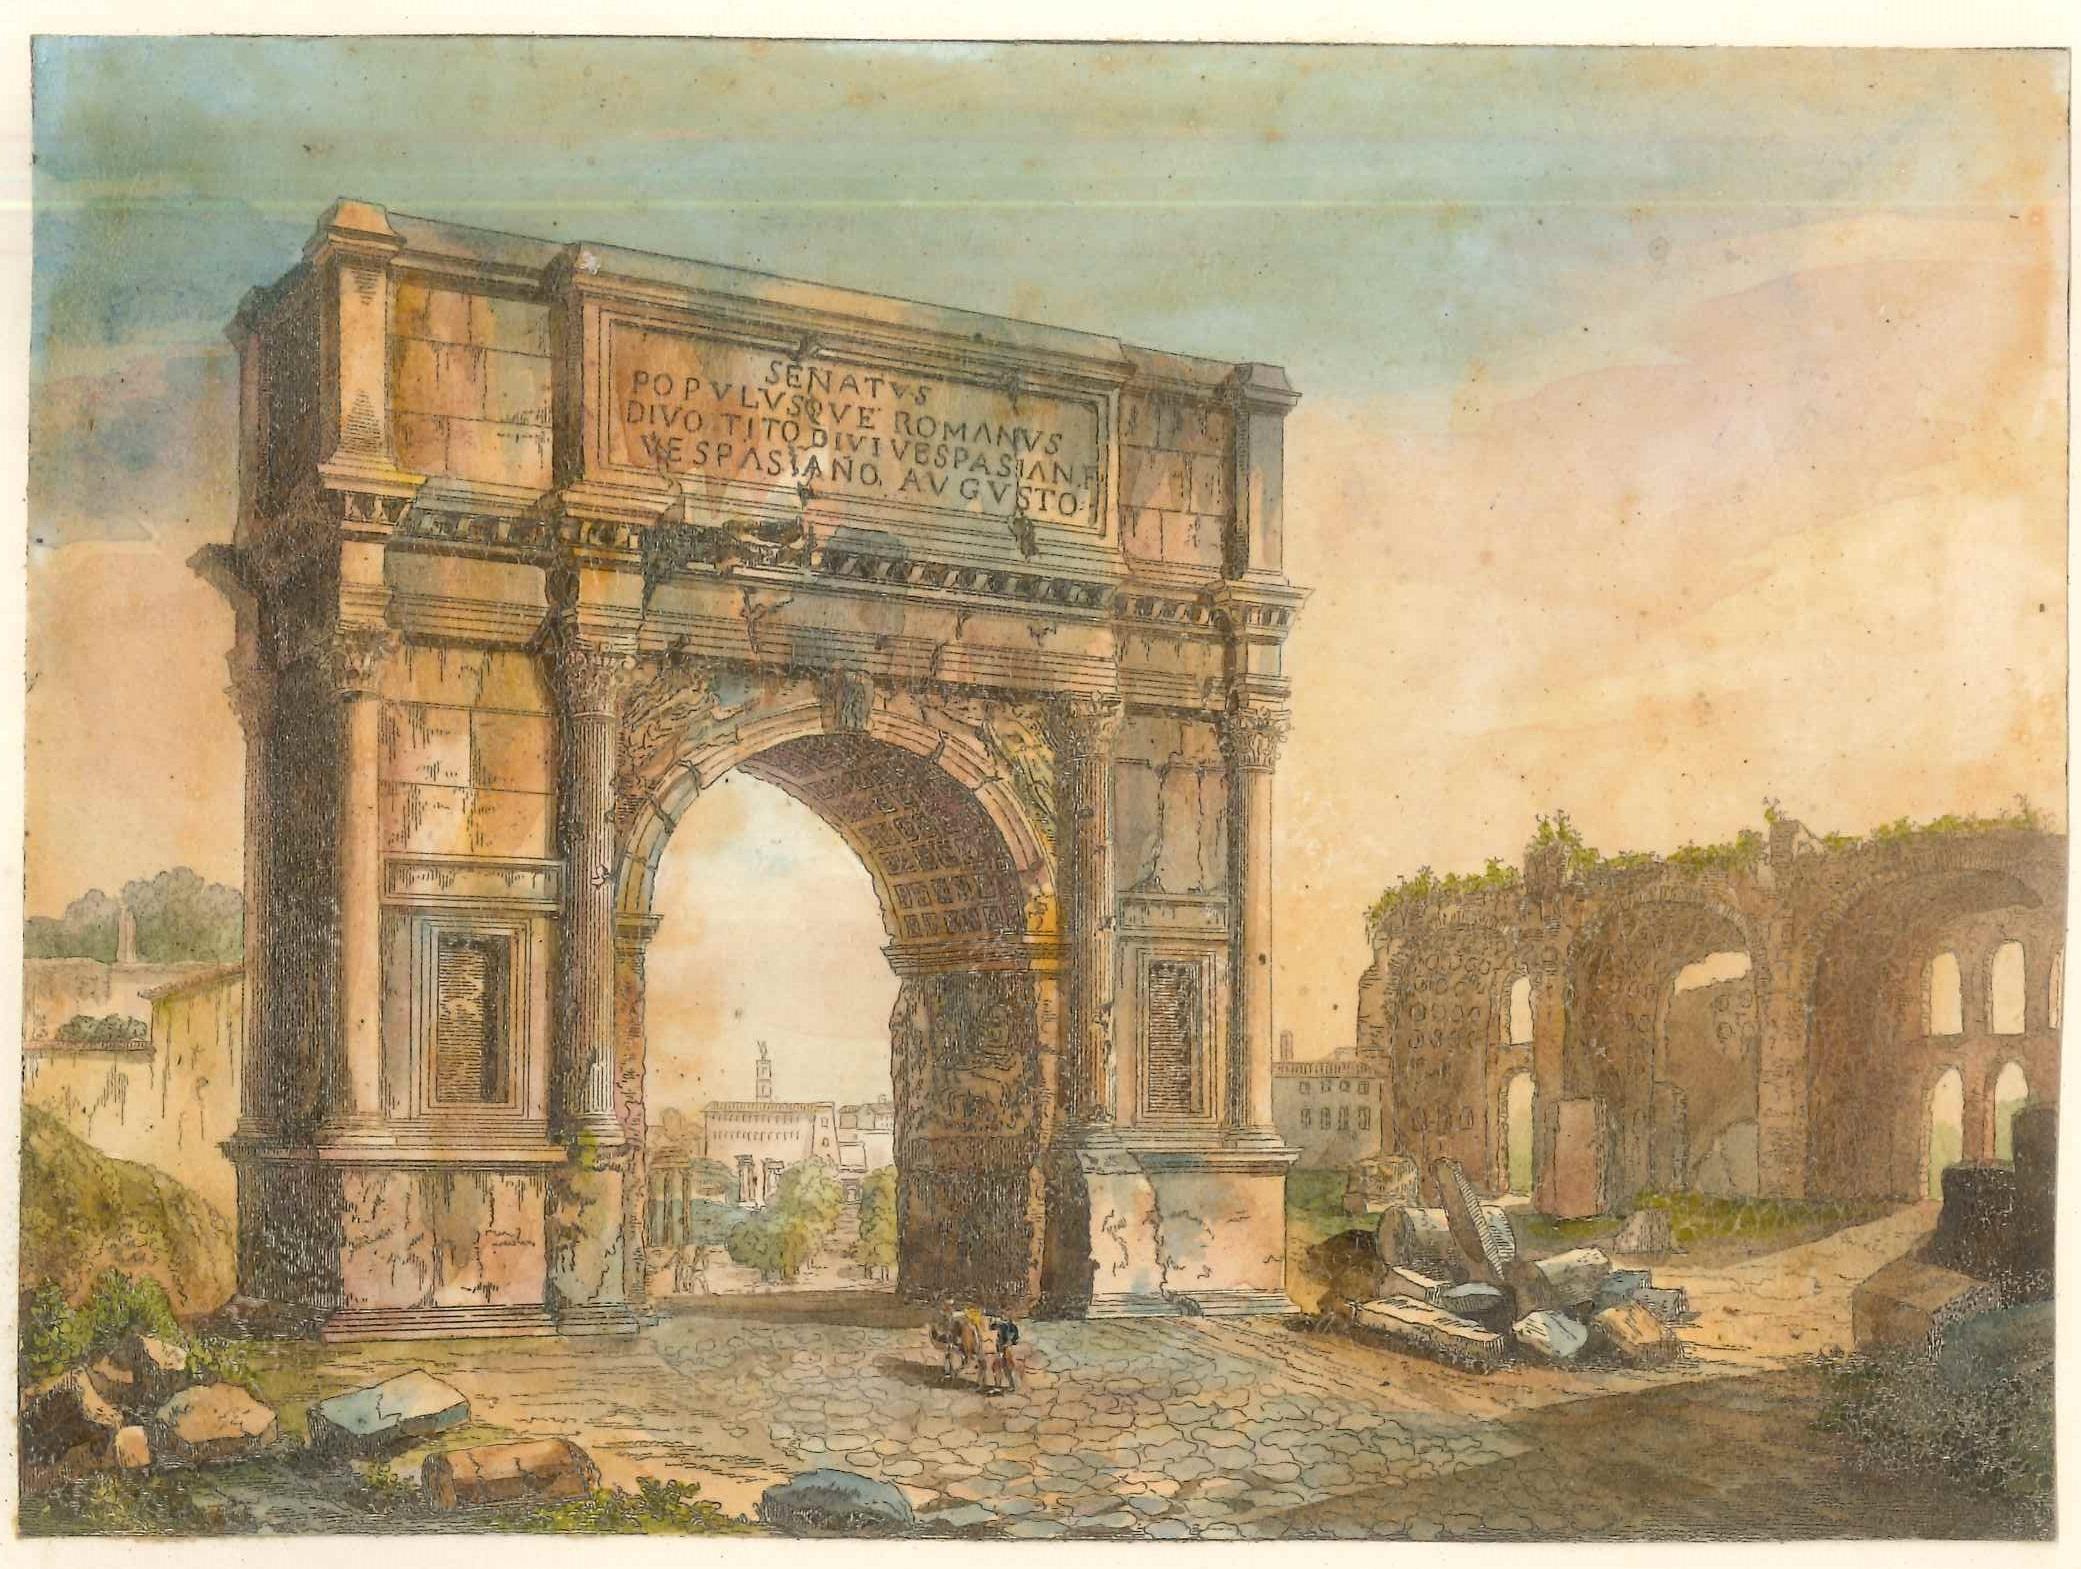 Unknown Figurative Print - Triumphal Arches - Original Lithographs and Watercolors - Mid 19th Century